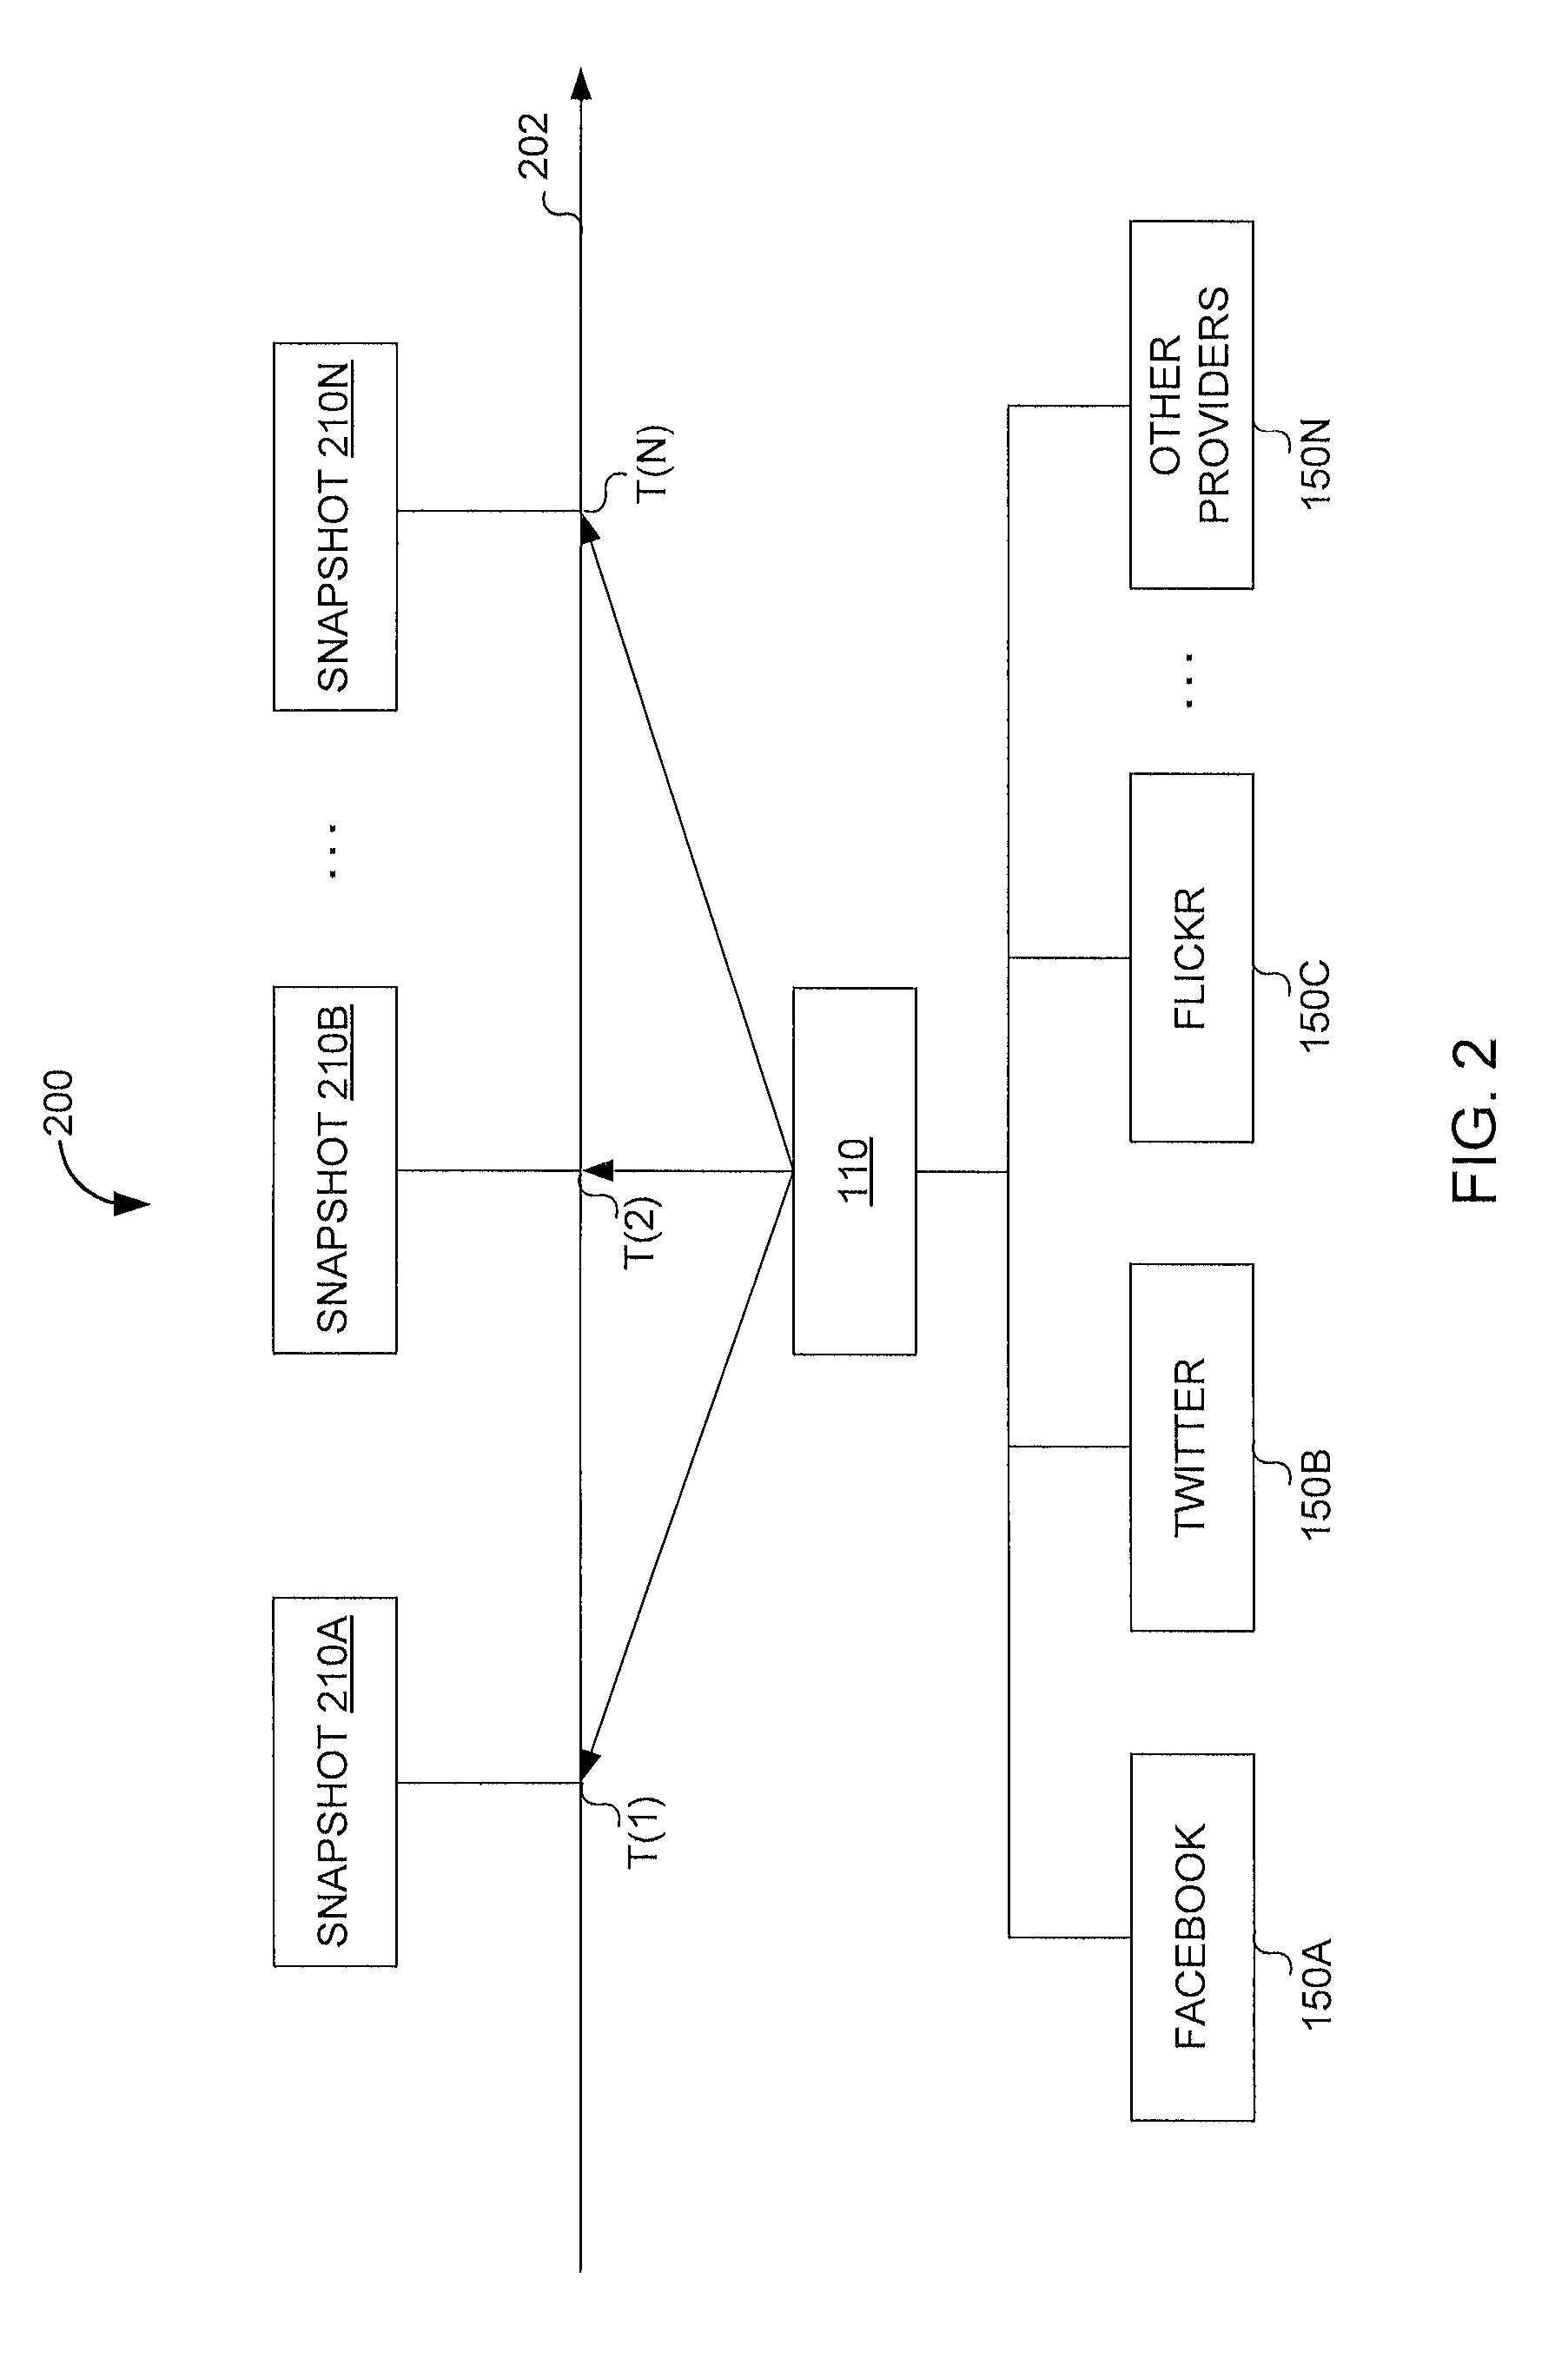 System and method for creating and managing geofeeds